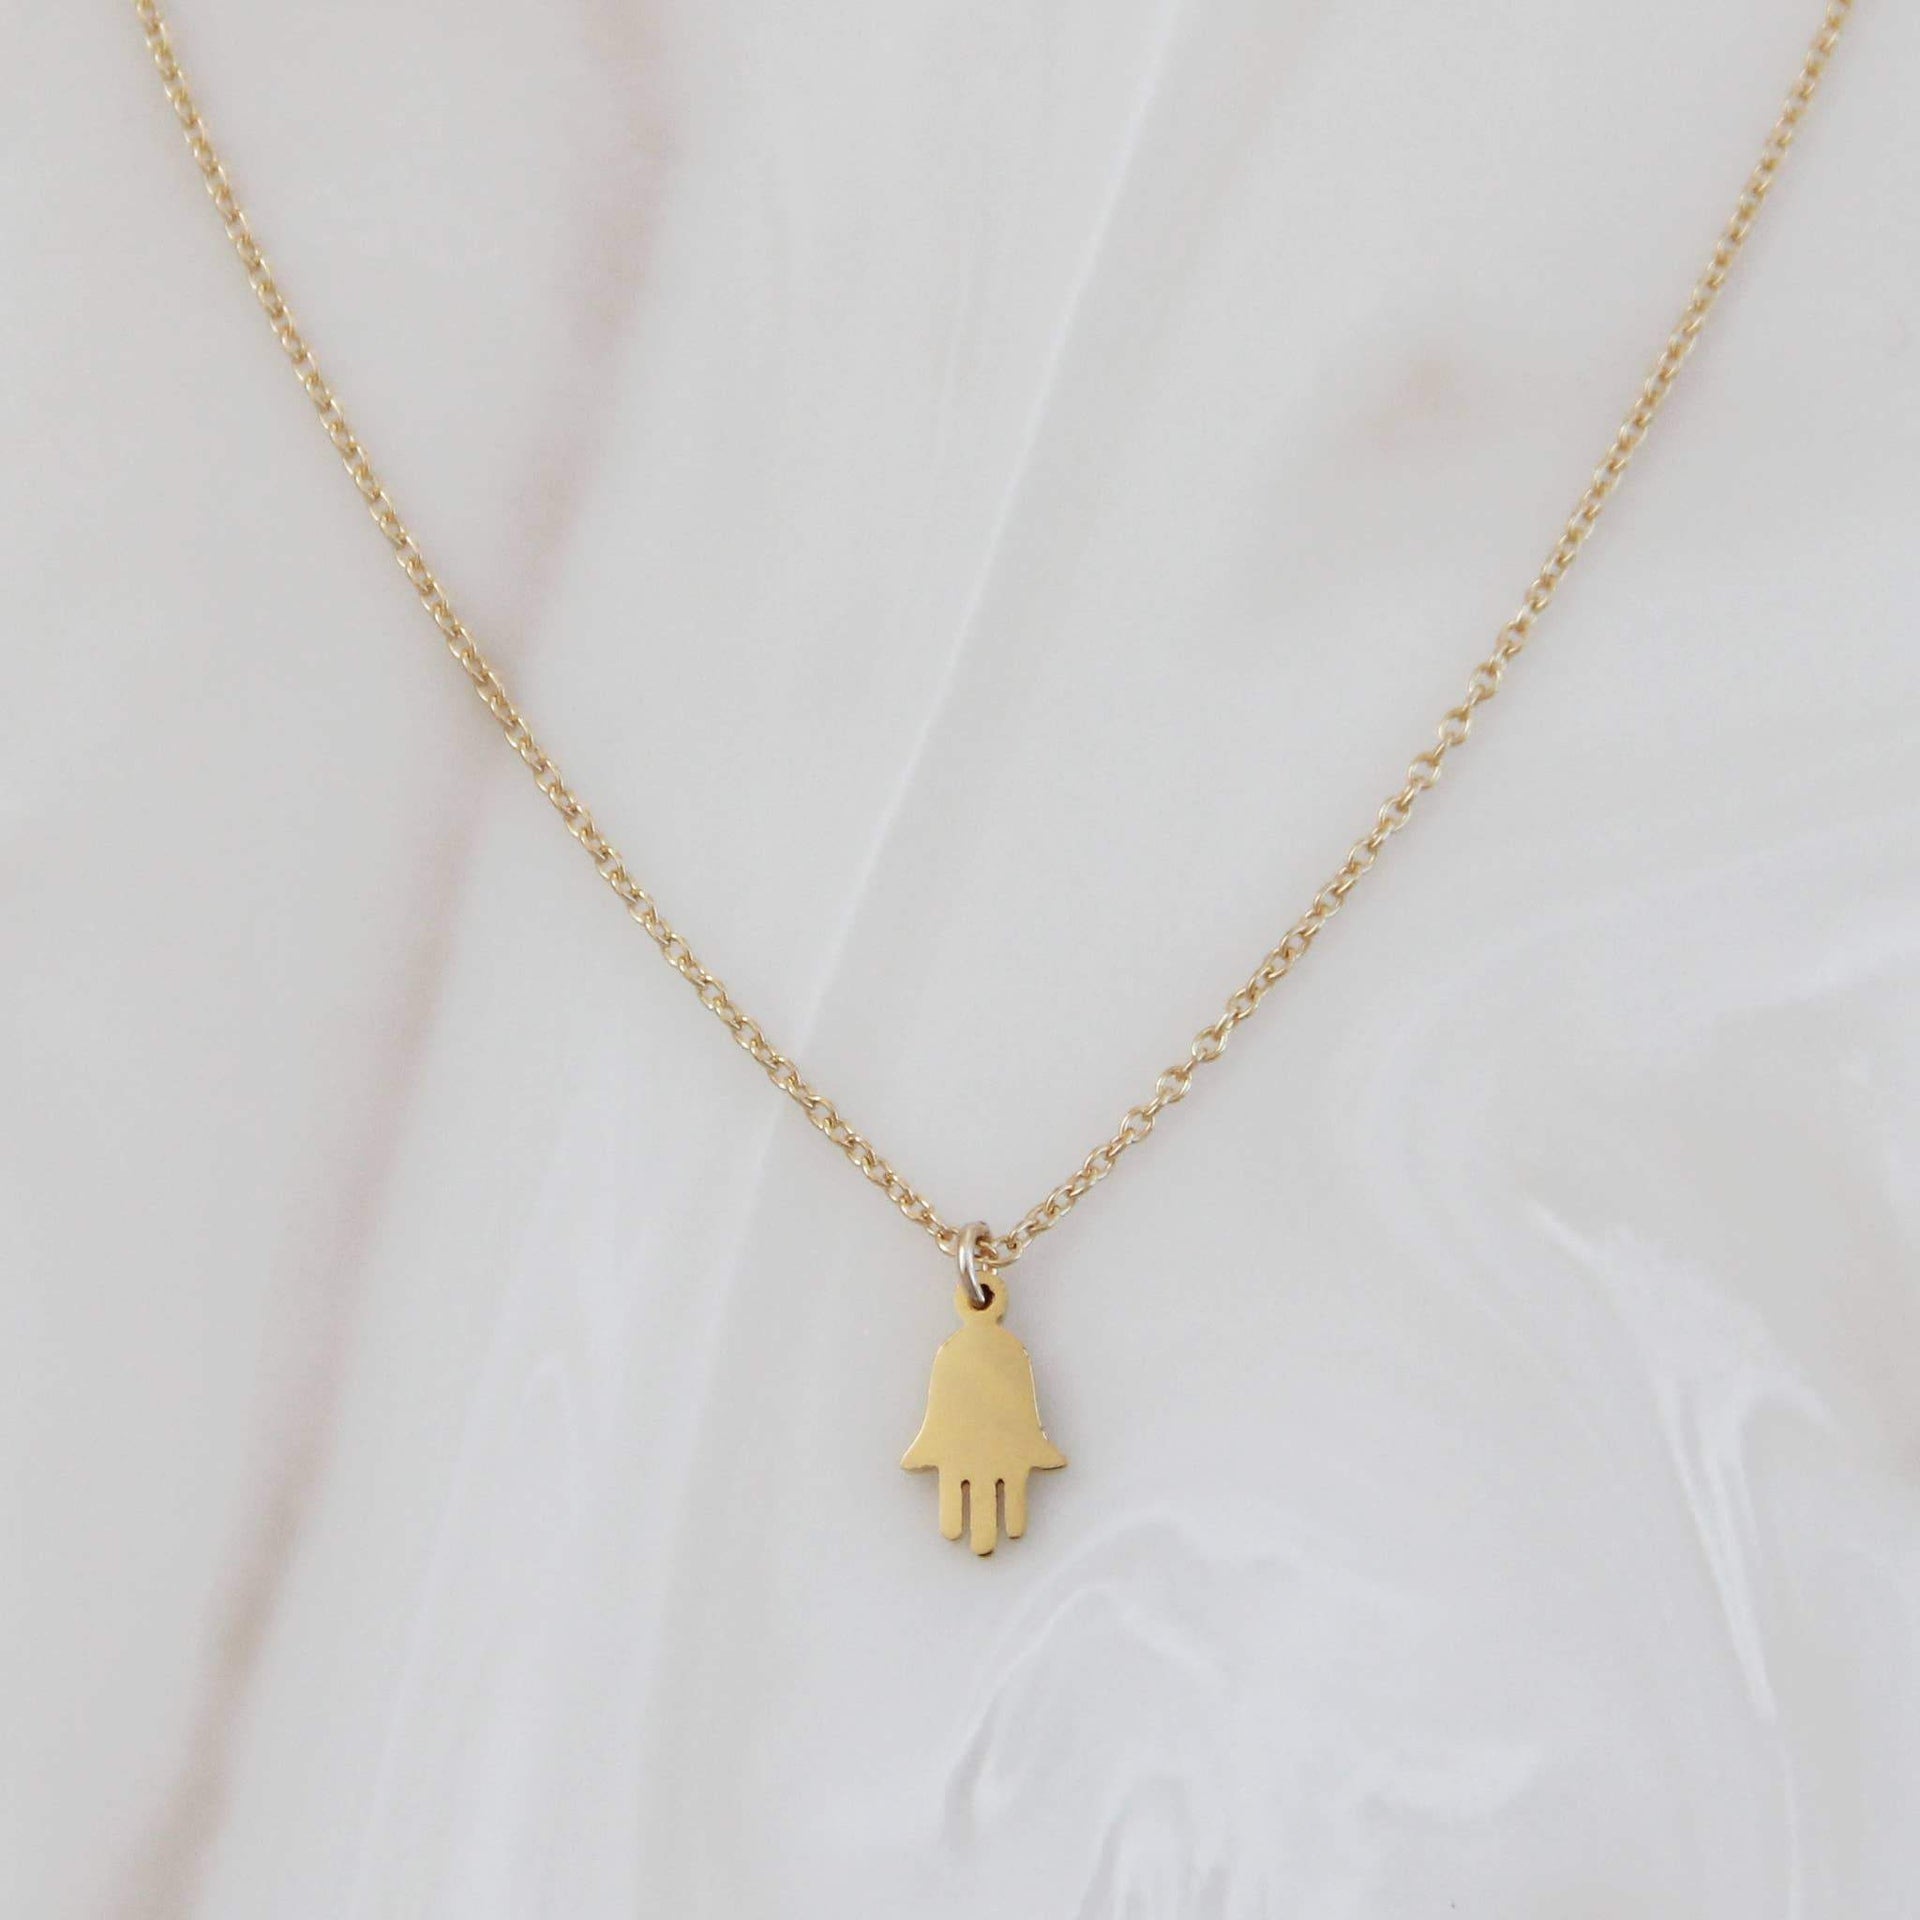 Maive Necklace Tiny Hamsa Necklace - Gold or Silver